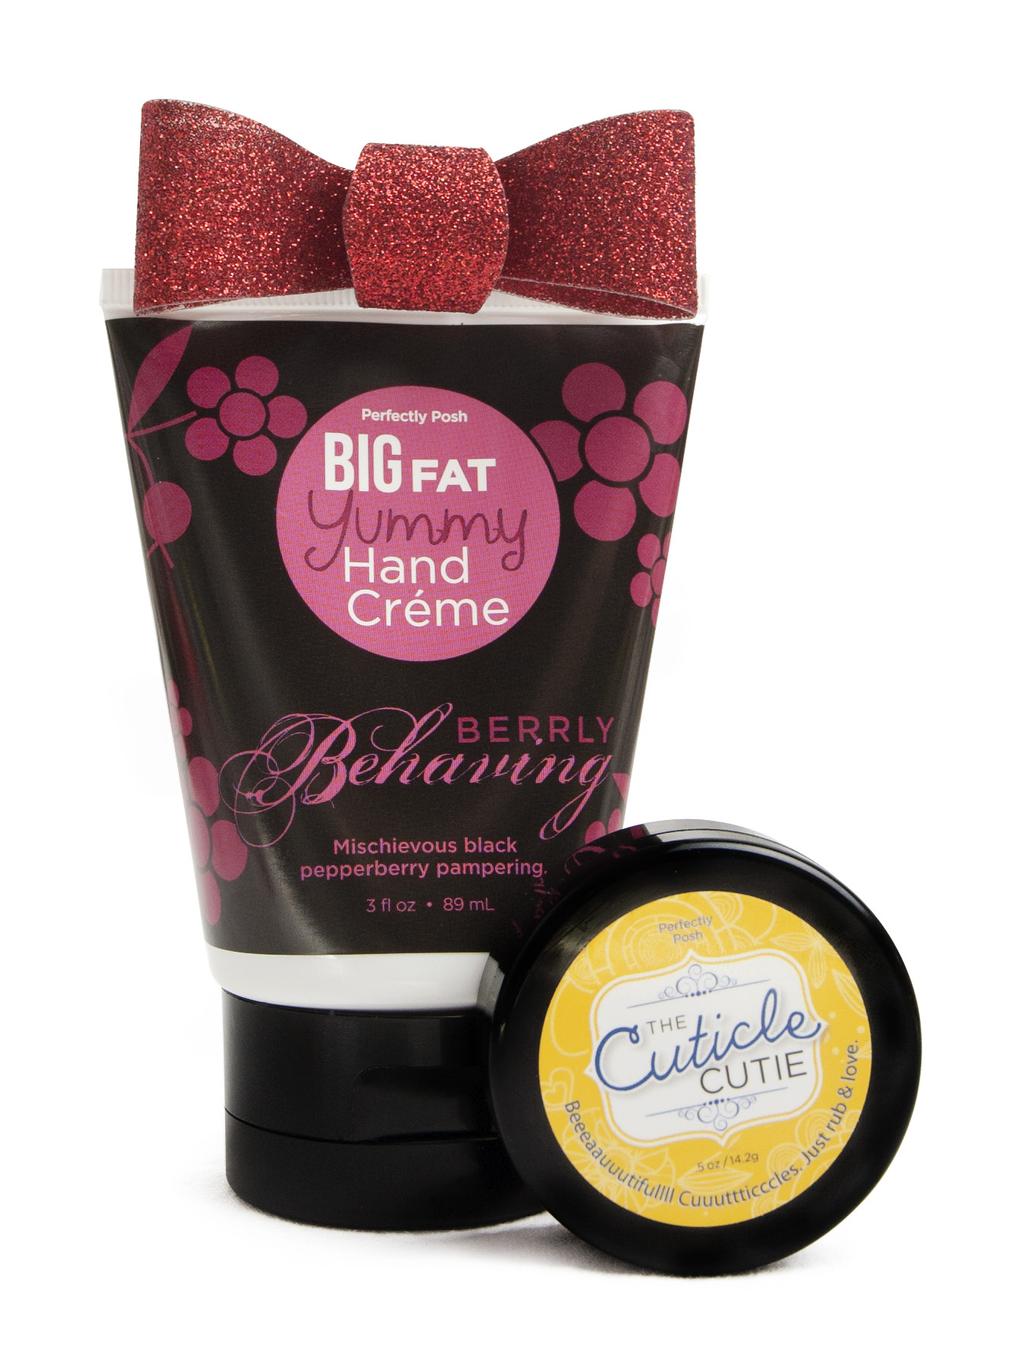 Big Fat Yummy Hands Bundle Hard-working hands need extra holiday loving. Non-greasy black pepperberry hand creme Intense lemony cuticle butter Get it both!